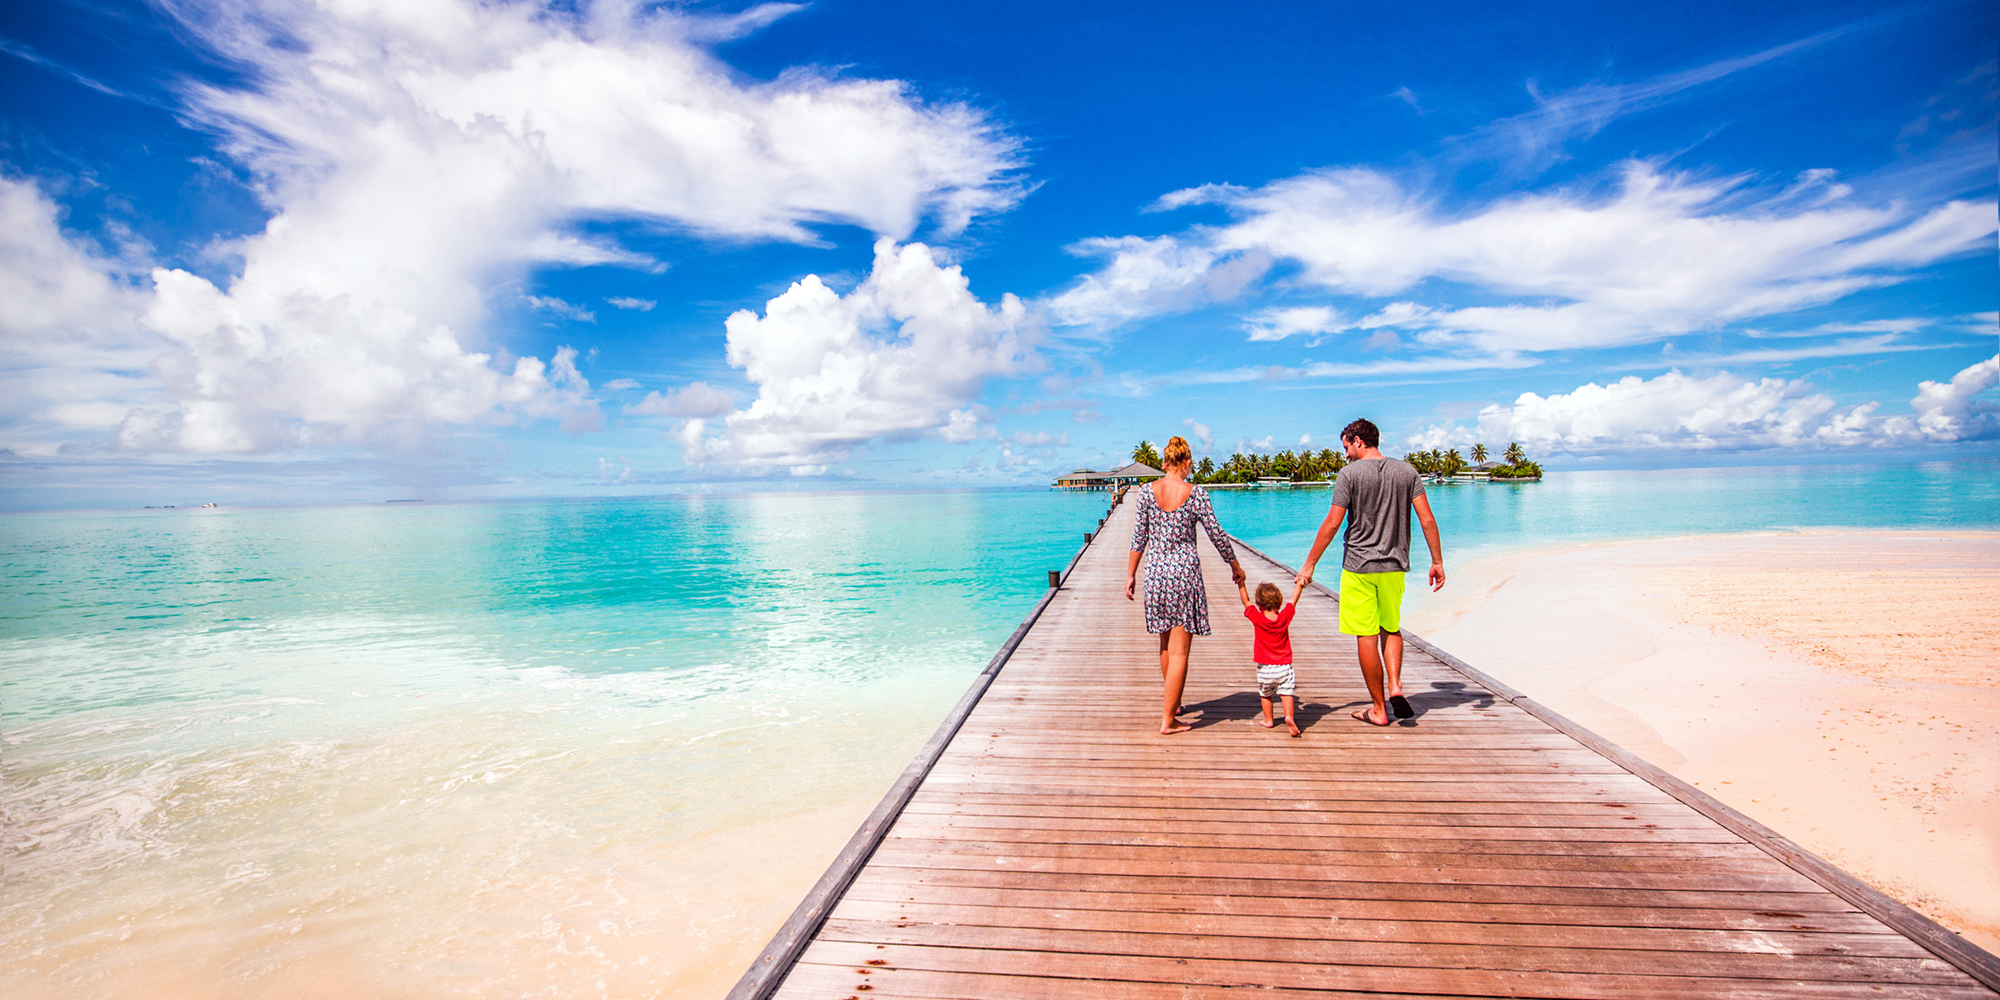 About Me - Photo of a young family walking on a pier on one of the most beautiful Maldivian islands in the Indian Ocean